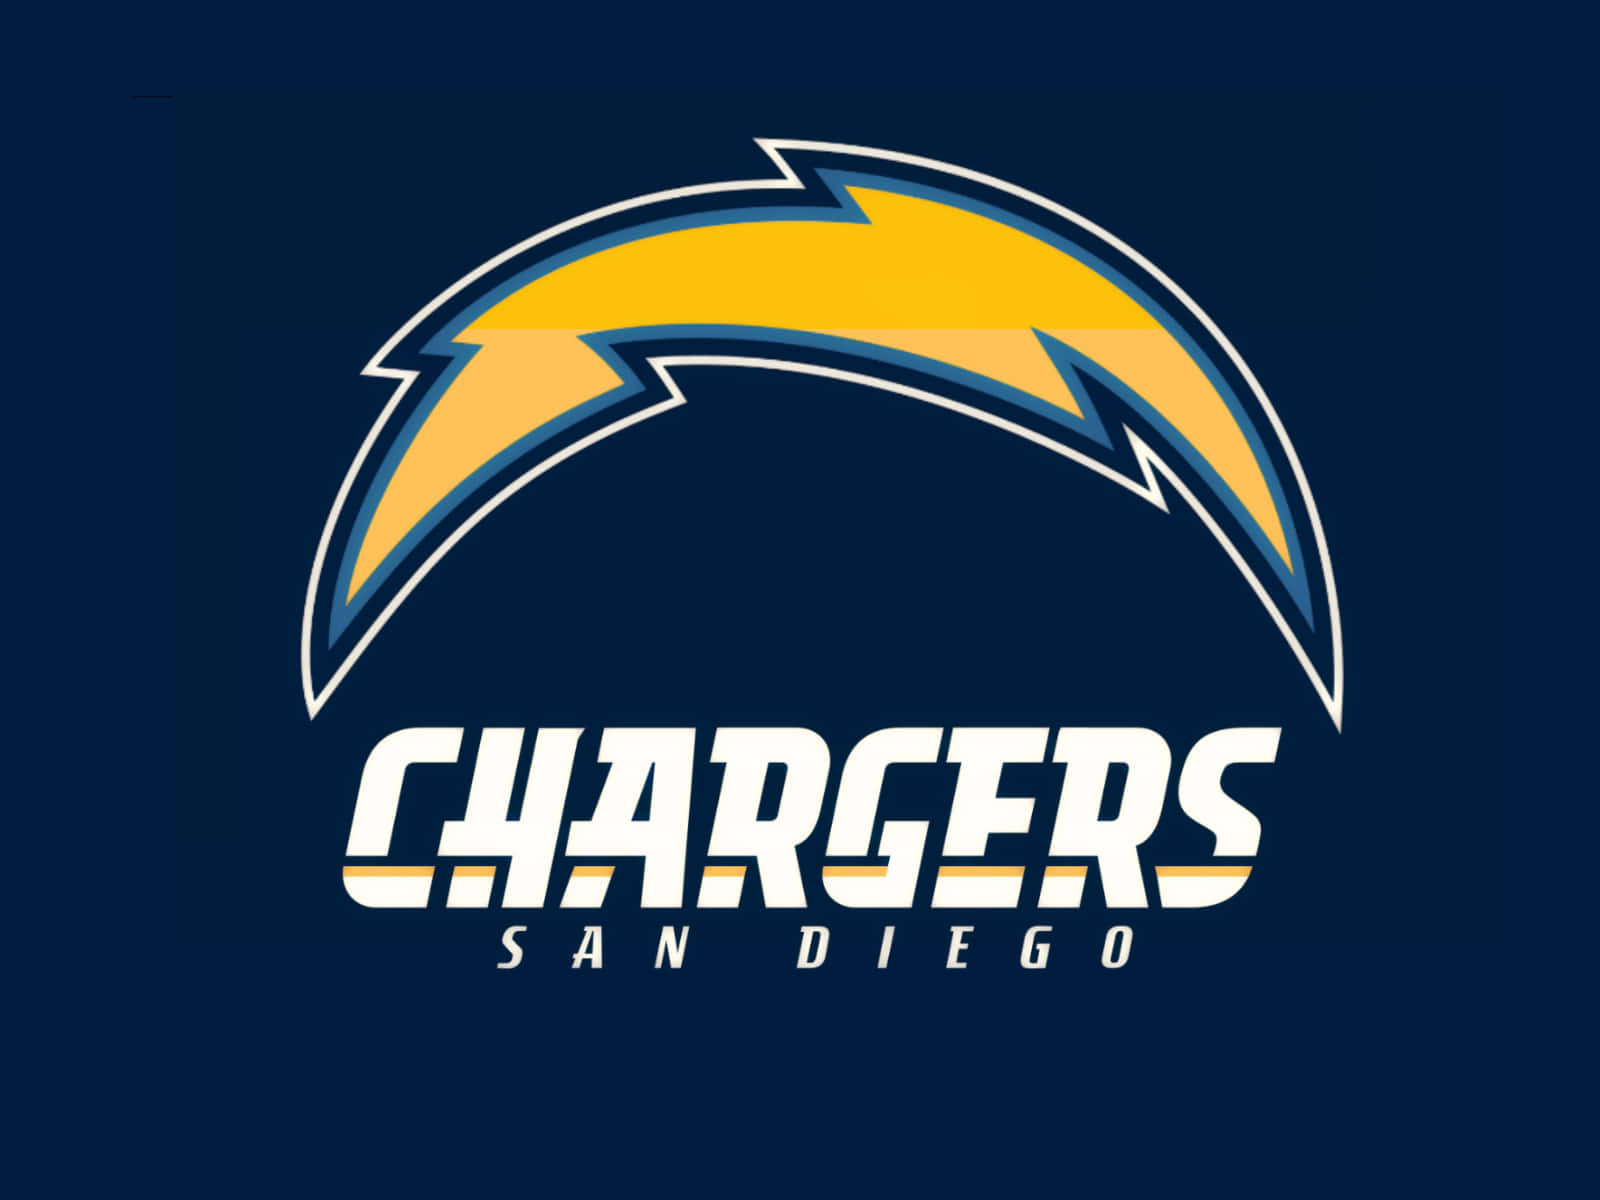 The San Diego Chargers take the field Wallpaper